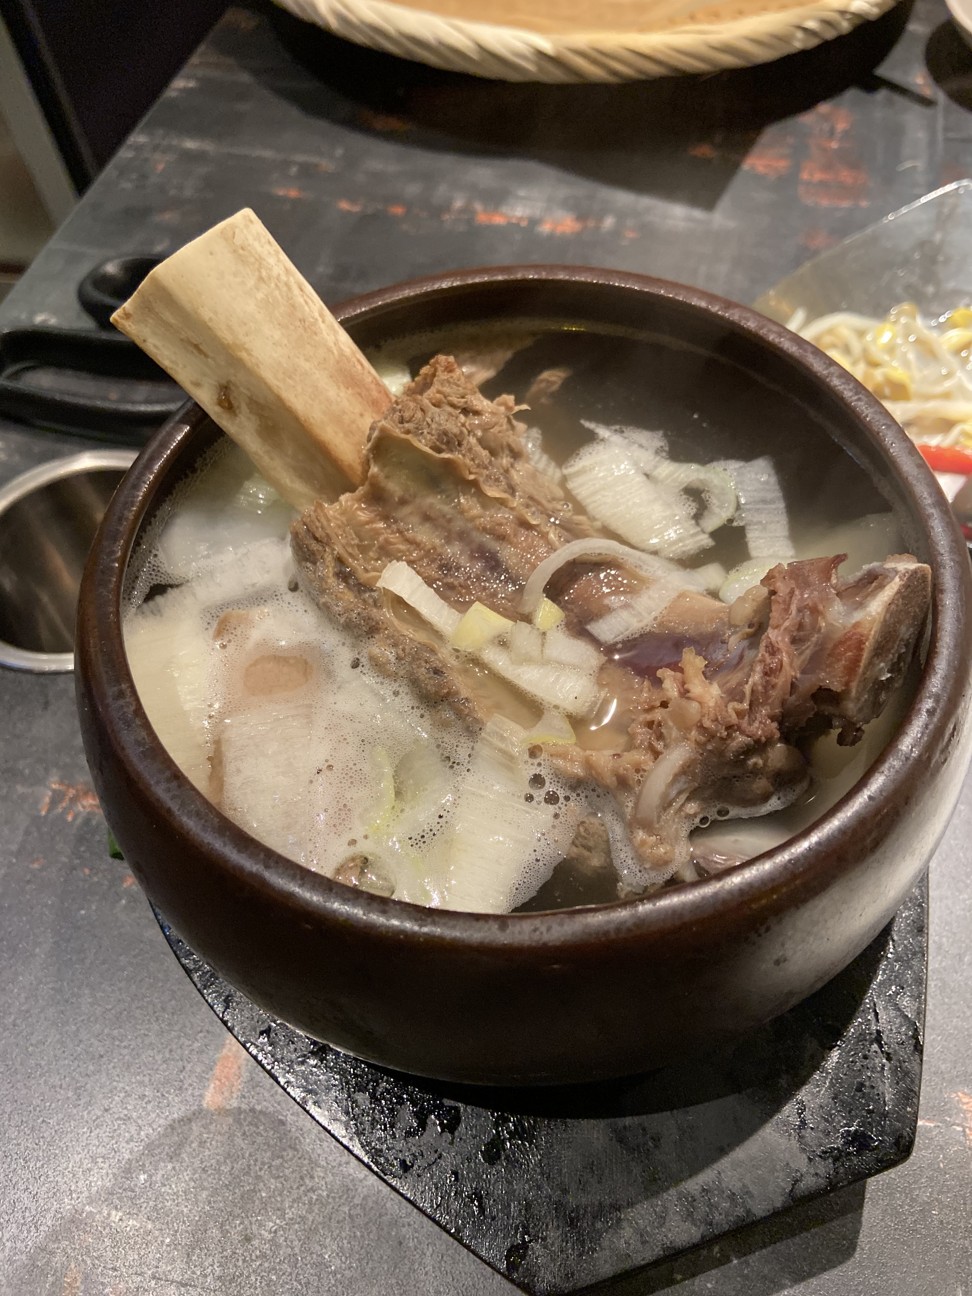 The beef bone soup is intense and beefy. Photo: Susan Jung